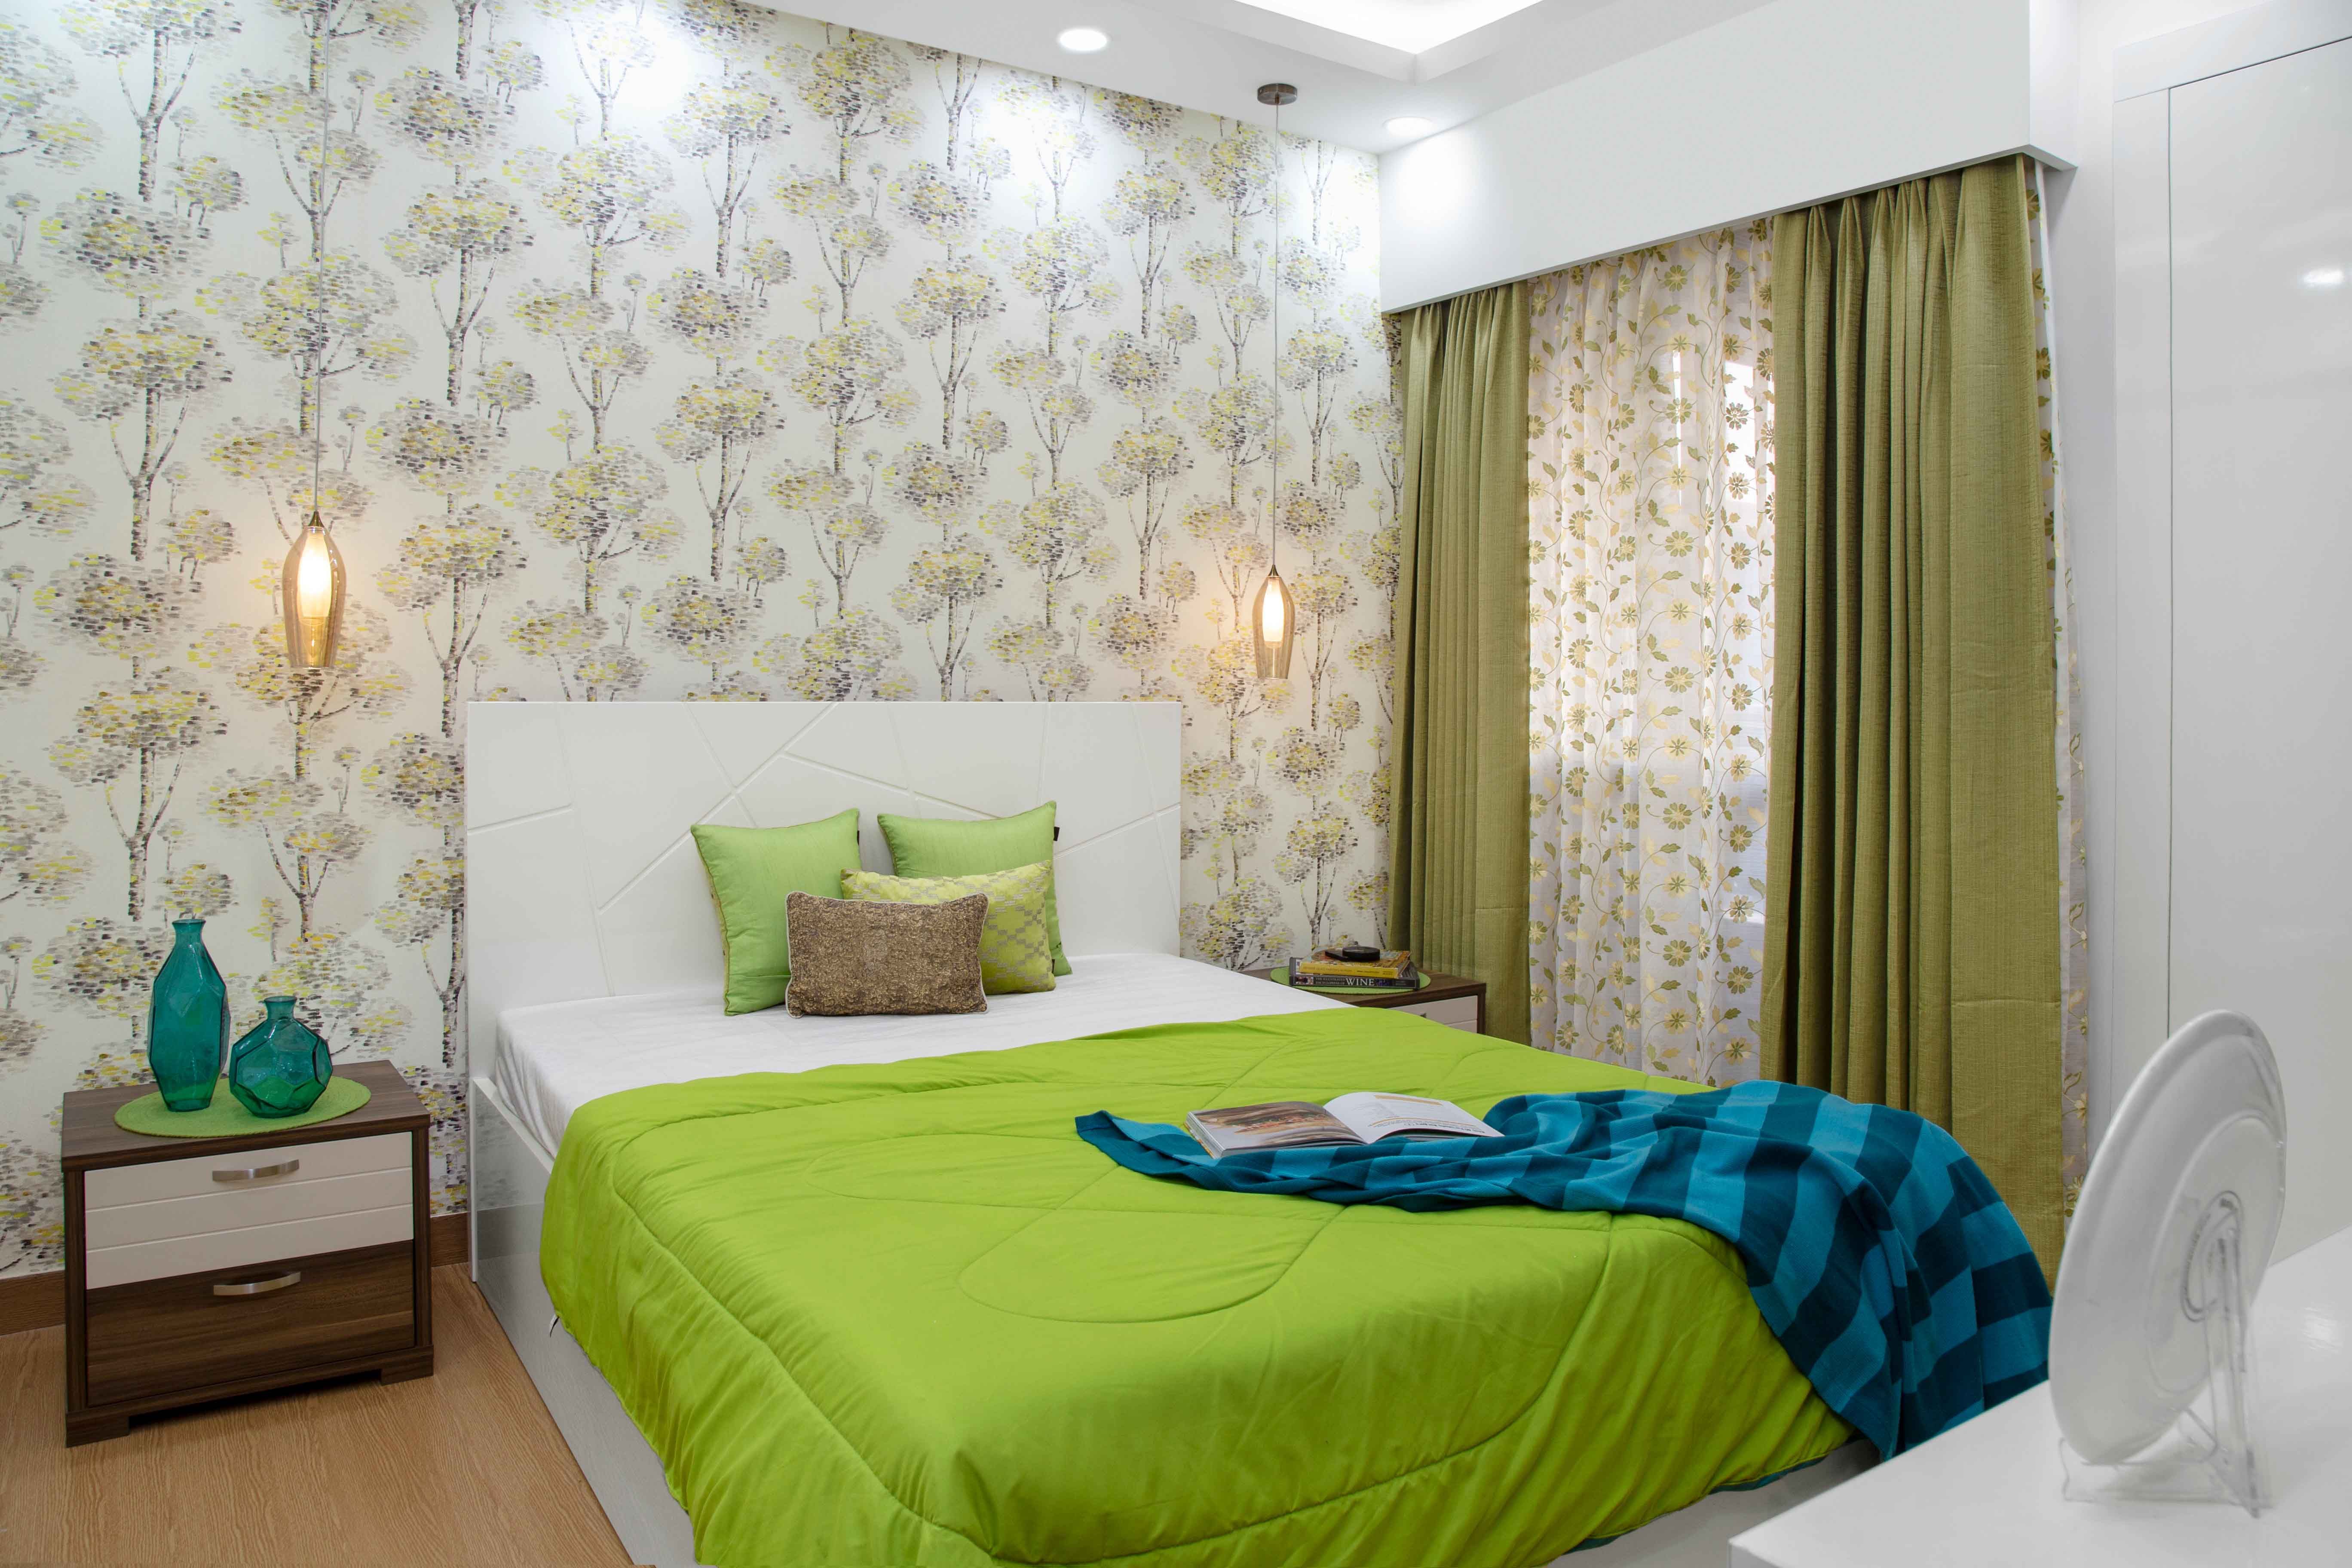 Tropical Guest Room Design With Green Upholstery And Nature-Themed Wallpaper